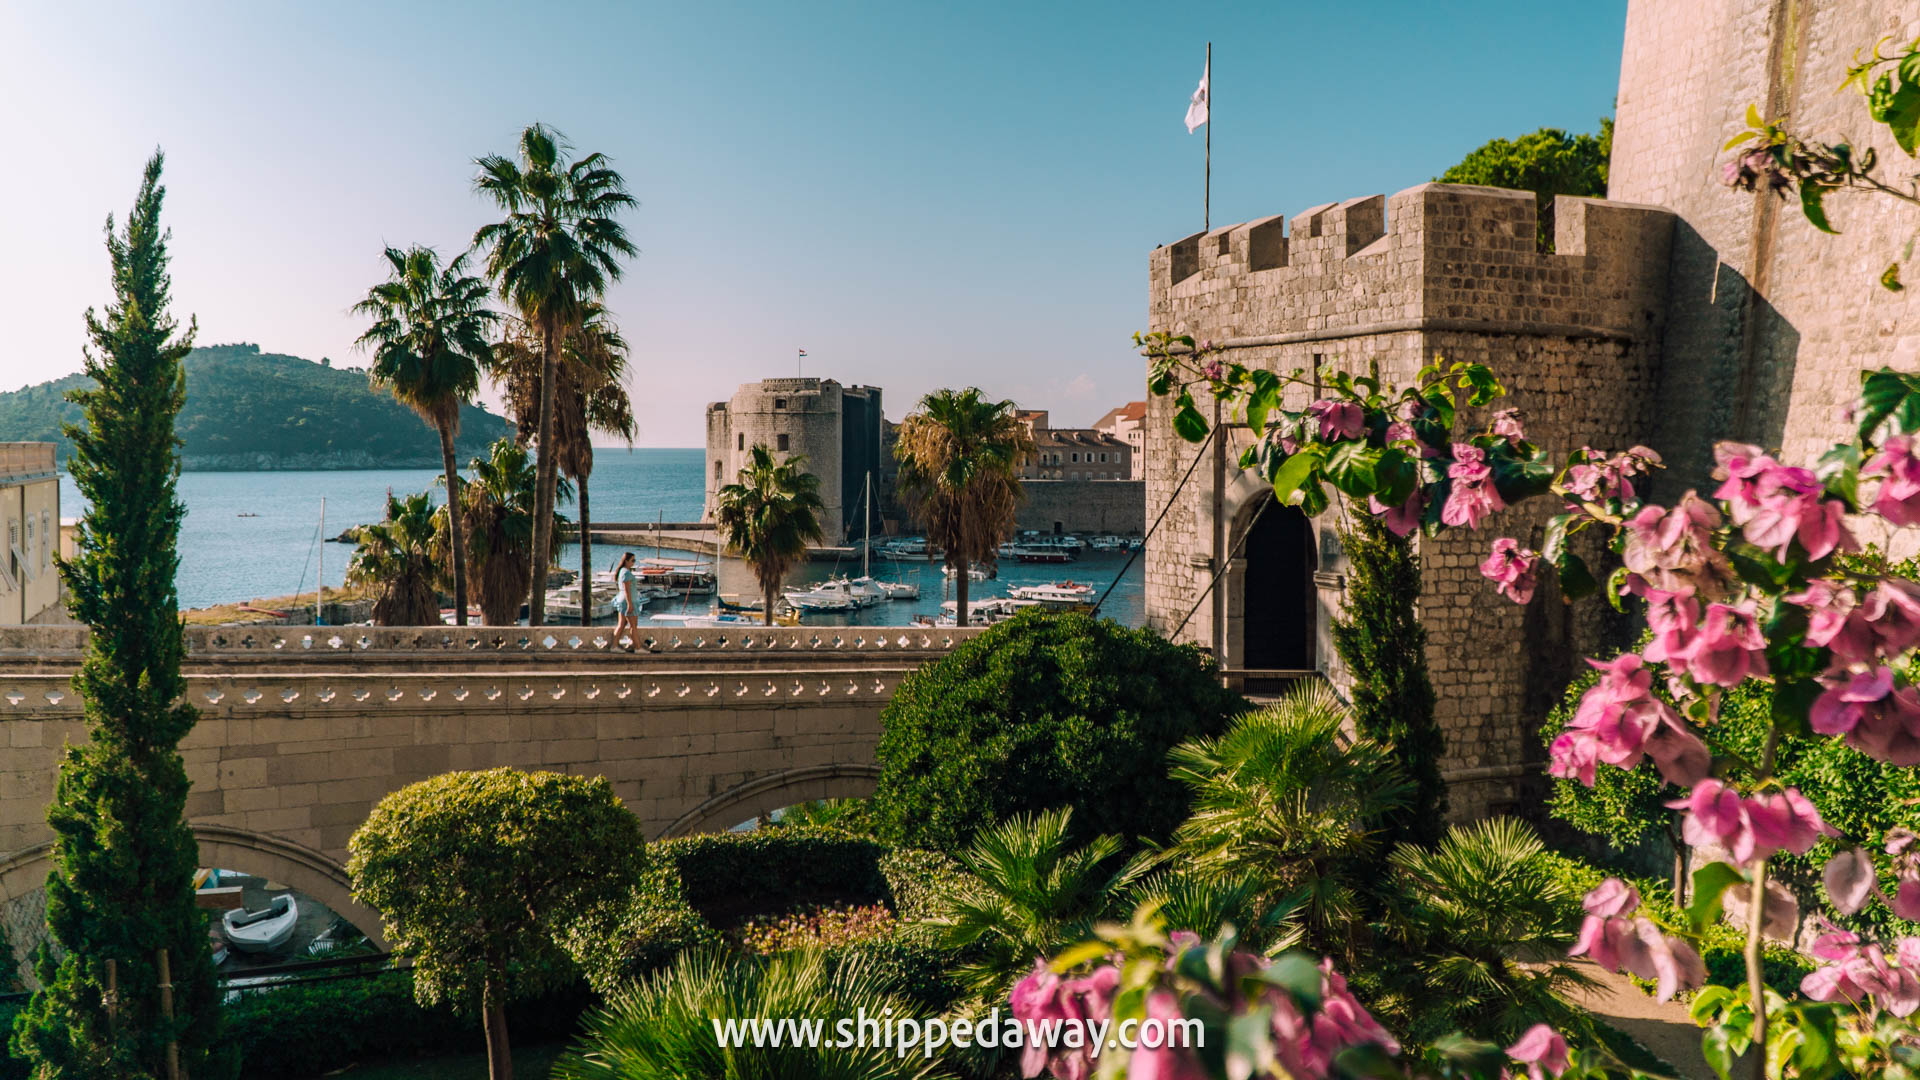 Dubrovnik Old Town, Croatia - Things to do in Old Town Dubrovnik - What to see in Dubrovnik's Old Town - Dubrovnik Old Town attractions - Dubrovnik Old Town Travel Guide